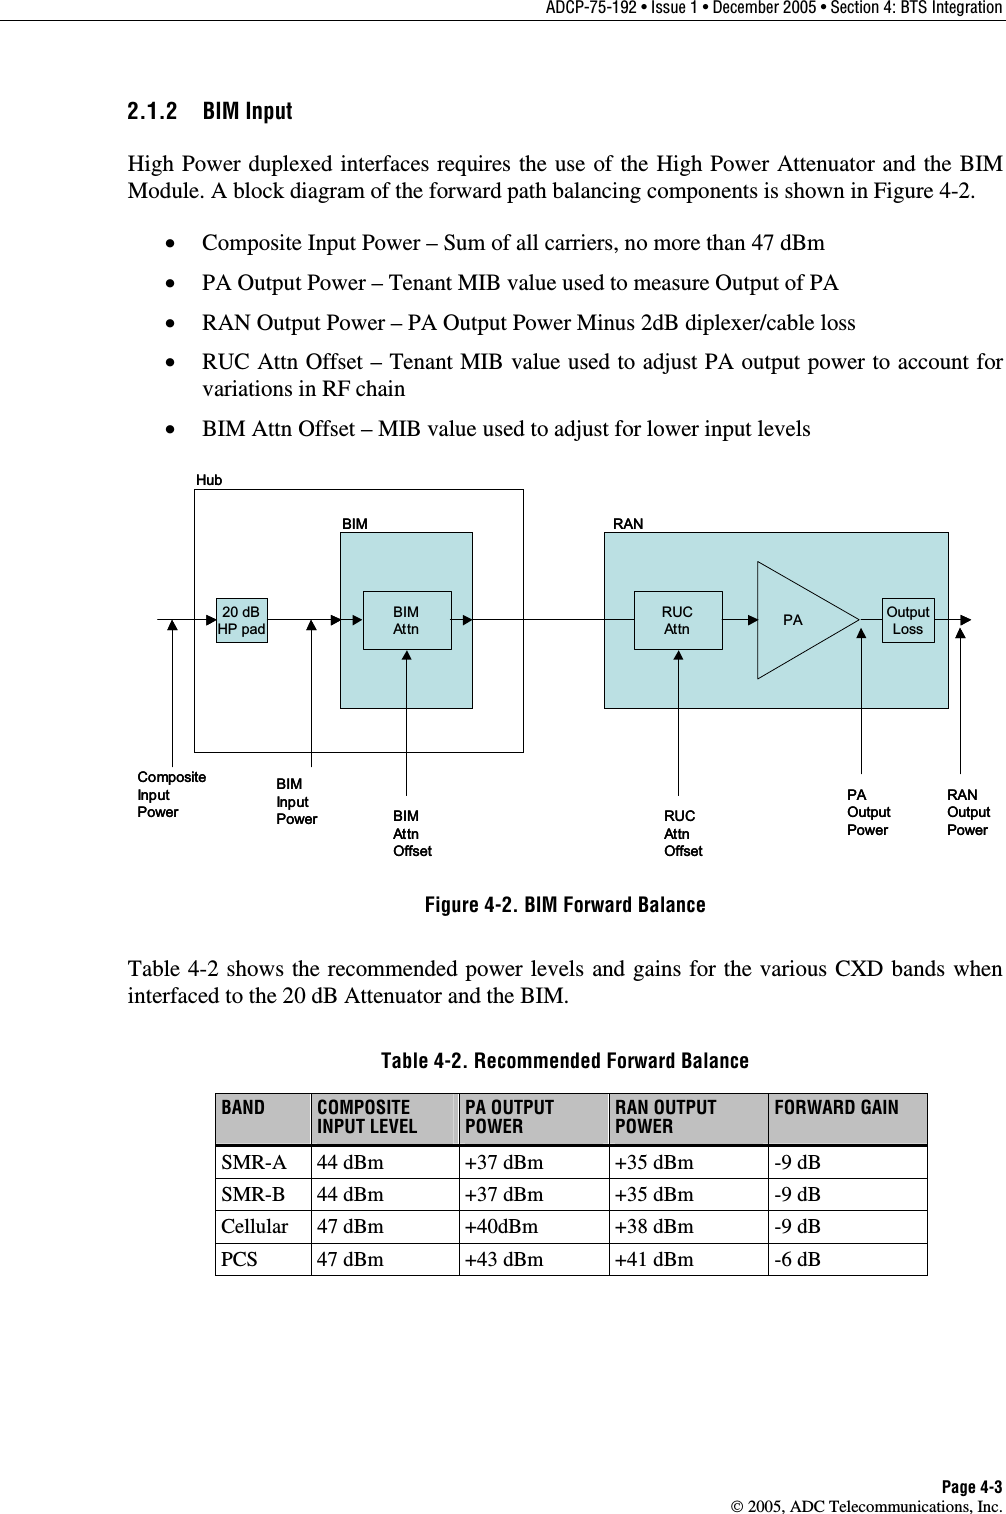 ADCP-75-192 • Issue 1 • December 2005 • Section 4: BTS Integration Page 4-3  2005, ADC Telecommunications, Inc. 2.1.2 BIM Input High Power duplexed interfaces requires the use of the High Power Attenuator and the BIM Module. A block diagram of the forward path balancing components is shown in Figure 4-2. •  Composite Input Power – Sum of all carriers, no more than 47 dBm •  PA Output Power – Tenant MIB value used to measure Output of PA •  RAN Output Power – PA Output Power Minus 2dB diplexer/cable loss •  RUC Attn Offset – Tenant MIB value used to adjust PA output power to account for variations in RF chain •  BIM Attn Offset – MIB value used to adjust for lower input levels PARANPAOutputPowerRUCAttnRANOutputPowerOutputLossHub20 dBHP padCompositeInputPower RUCAttnOffsetBIMBIMAt tnBIMAt tnOffsetBIMInputPowerPARANPAOutputPowerRUCAttnRANOutputPowerOutputLossHub20 dBHP padCompositeInputPower RUCAttnOffsetBIMBIMAt tnBIMAt tnOffsetBIMInputPower Figure 4-2. BIM Forward Balance Table 4-2 shows the recommended power levels and gains for the various CXD bands when interfaced to the 20 dB Attenuator and the BIM. Table 4-2. Recommended Forward Balance BAND  COMPOSITE INPUT LEVEL PA OUTPUT POWER RAN OUTPUT POWER FORWARD GAIN SMR-A  44 dBm  +37 dBm  +35 dBm  -9 dB SMR-B  44 dBm  +37 dBm  +35 dBm  -9 dB Cellular  47 dBm  +40dBm  +38 dBm  -9 dB PCS  47 dBm  +43 dBm  +41 dBm  -6 dB  